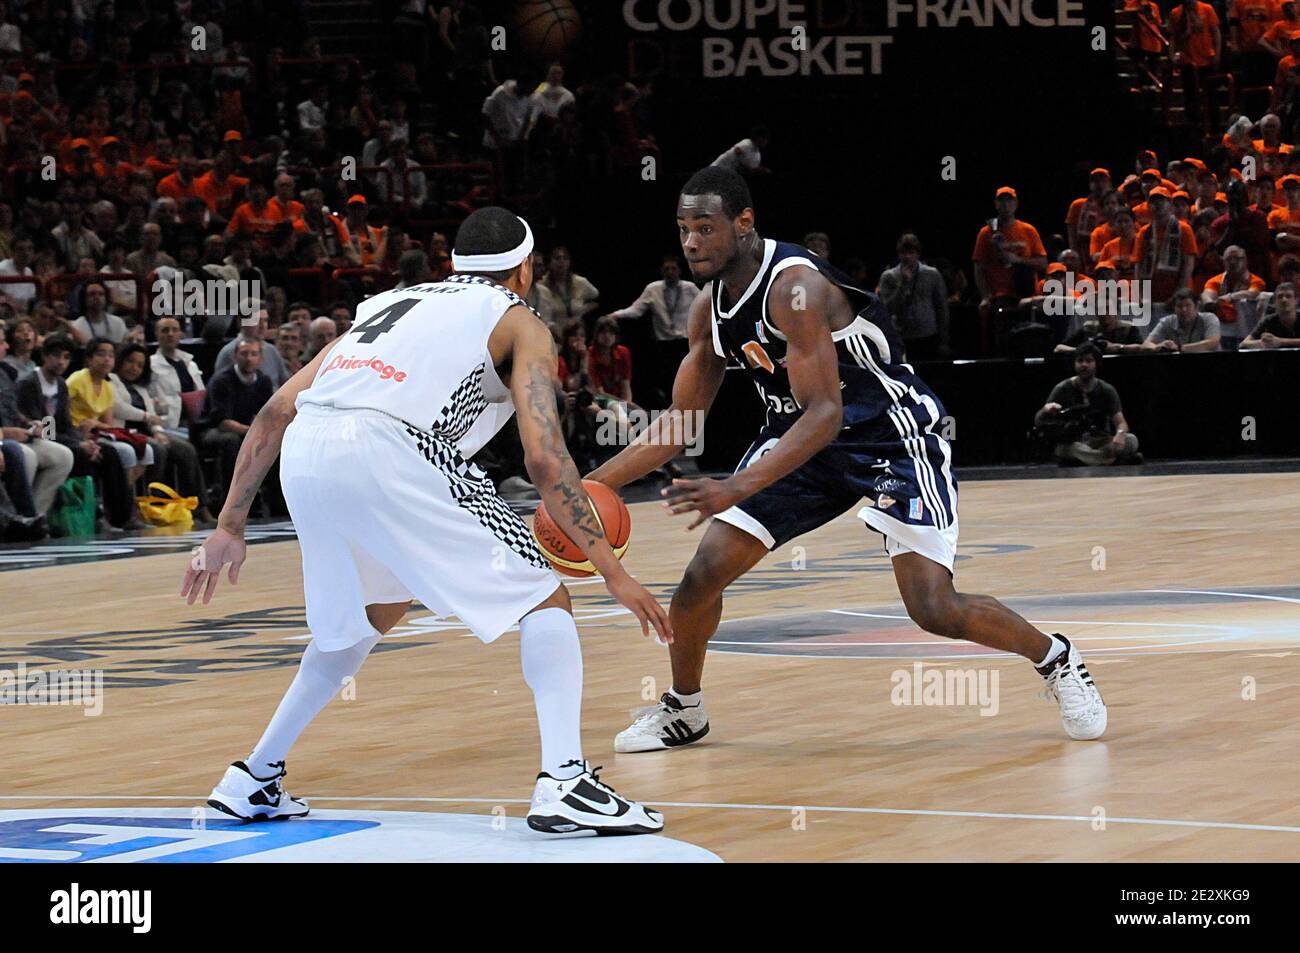 Gravelines' Yannick Bokkolo during the french cup basketball match, Orleans  vs Graveline at Palais Omnisports de